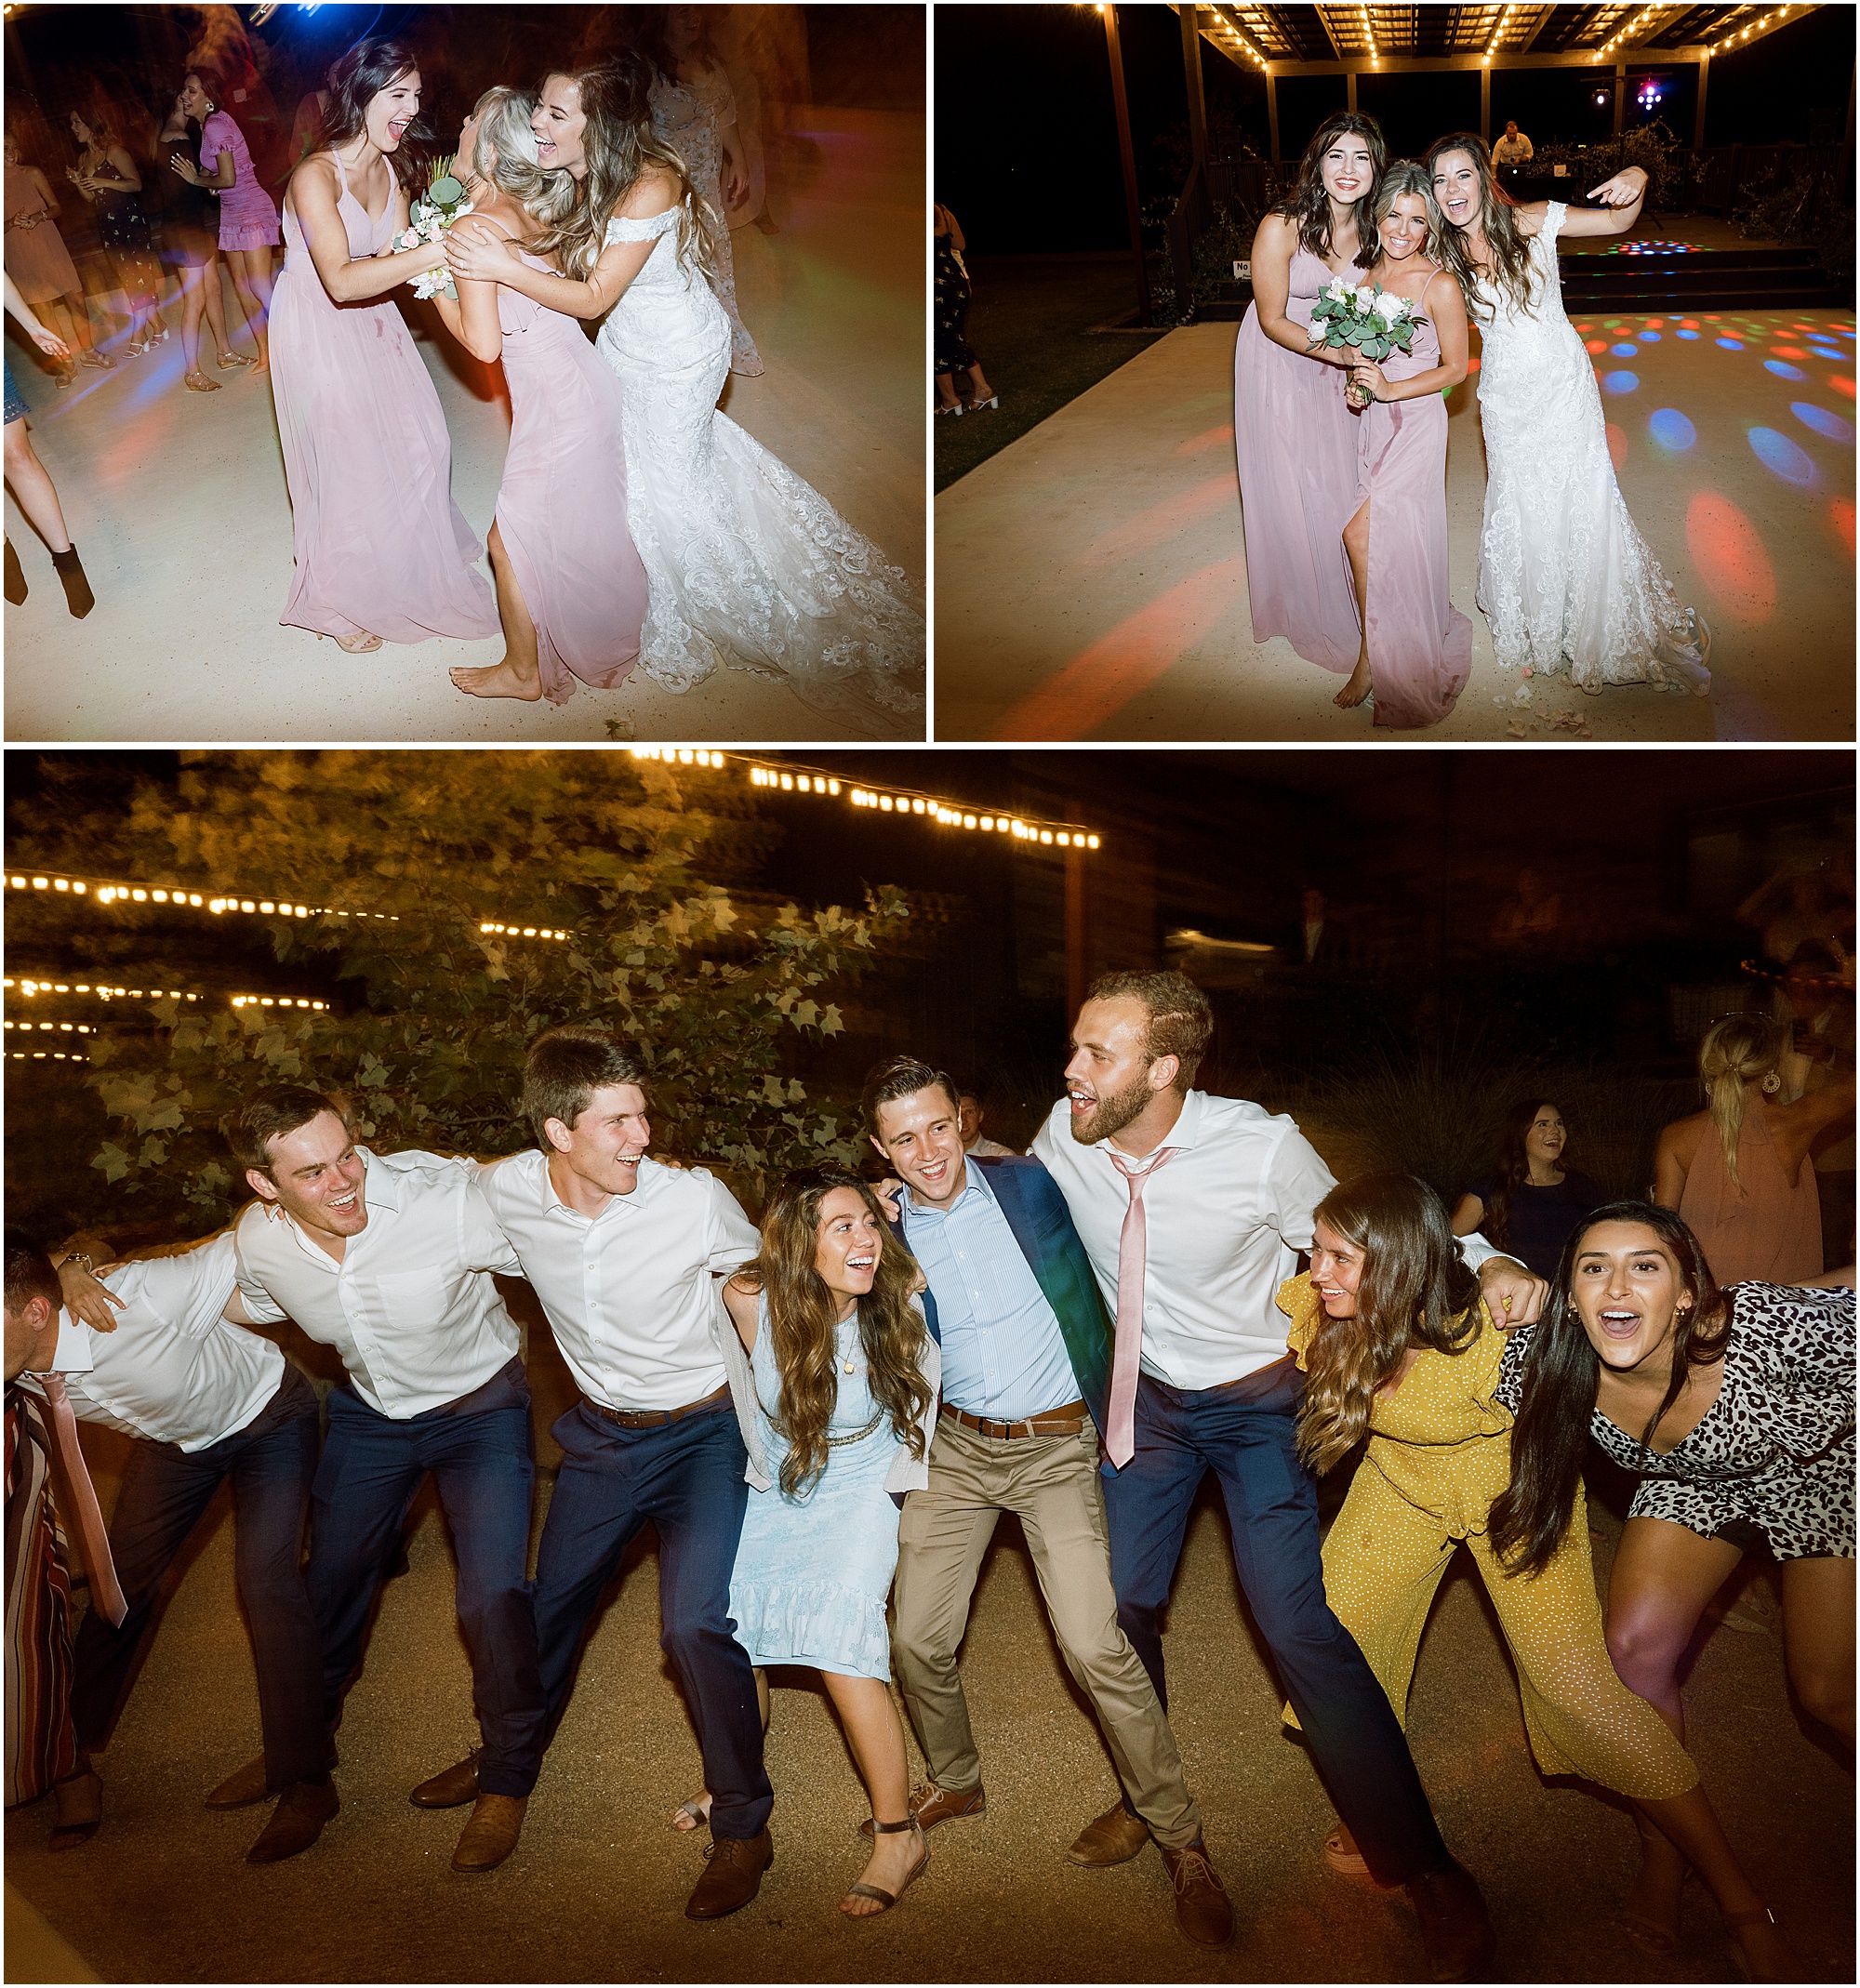 Austin, Texas Wedding Venues | Two Wishes Ranch | Two Wishes Ranch Wedding | Austin, Texas | Summer Wedding Color Palette | Summer Wedding Inspiration | Summer Wedding Colors | Austin Wedding Photographer | Fort Worth Wedding Photographer | Dallas Wedding Photographer | Bailee Bruce Photography 